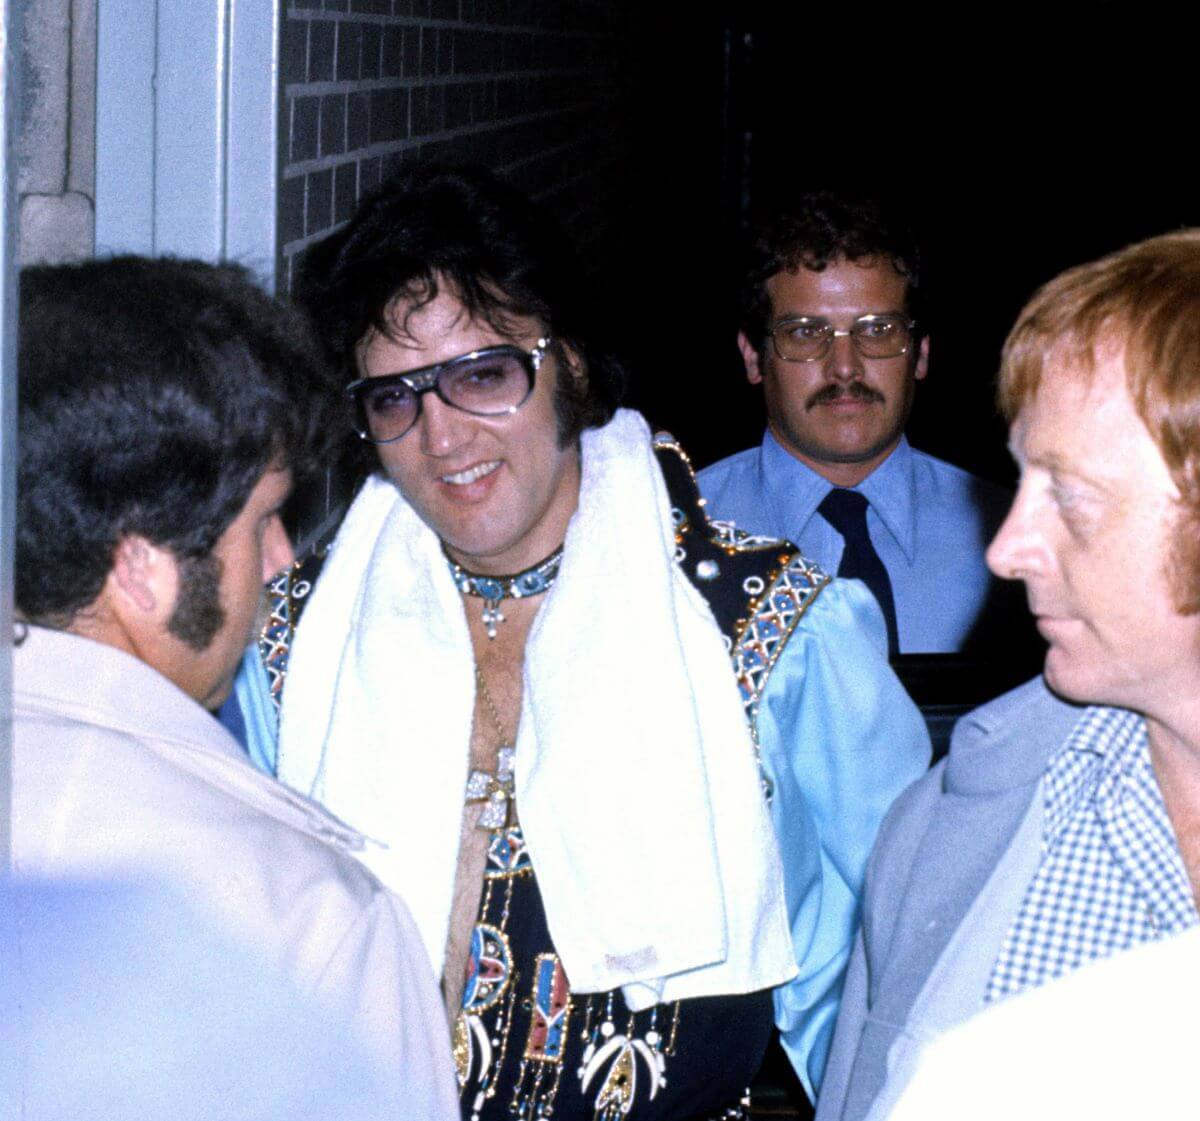 Elvis has a towel around his neck and wears sunglasses. He walks with his bodyguards.